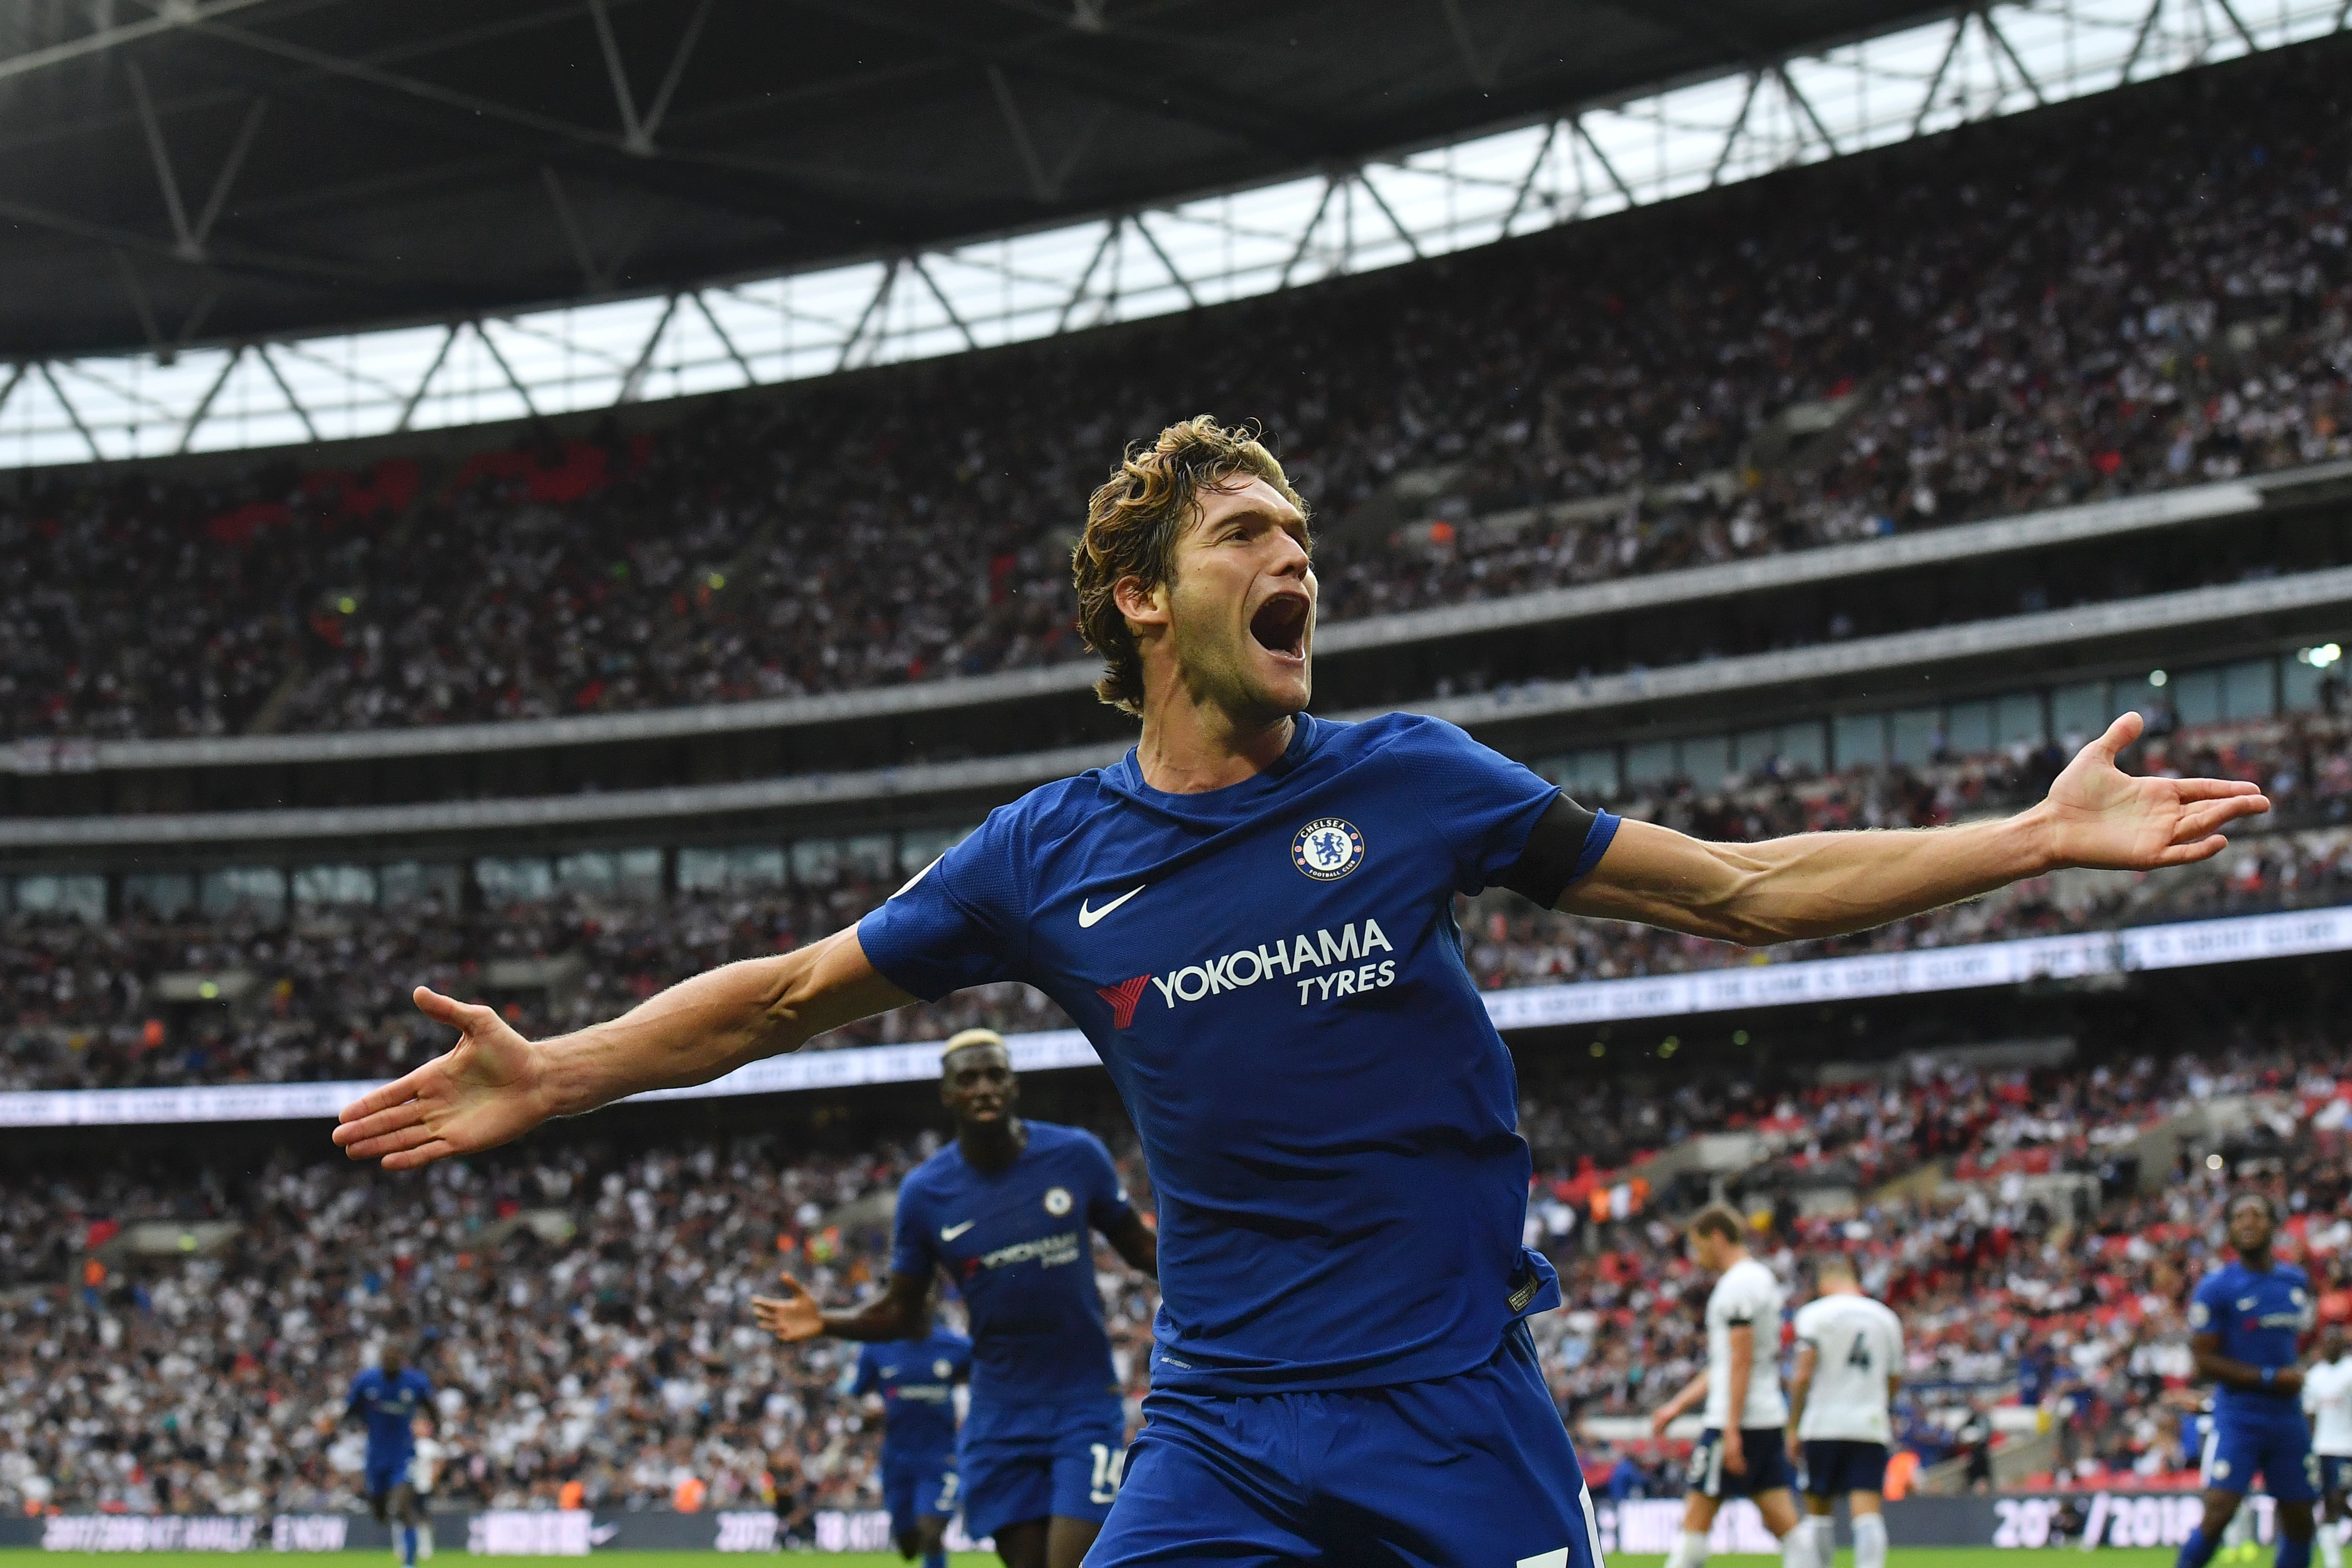 Chelsea's Spanish defender Marcos Alonso celebrates after he scored their second goal during the English Premier League football match between Tottenham Hotspur and Chelsea at Wembley Stadium in London, on August 20, 2017. / AFP PHOTO / Ben STANSALL / RESTRICTED TO EDITORIAL USE. No use with unauthorized audio, video, data, fixture lists, club/league logos or 'live' services. Online in-match use limited to 75 images, no video emulation. No use in betting, games or single club/league/player publications.  /         (Photo credit should read BEN STANSALL/AFP/Getty Images)